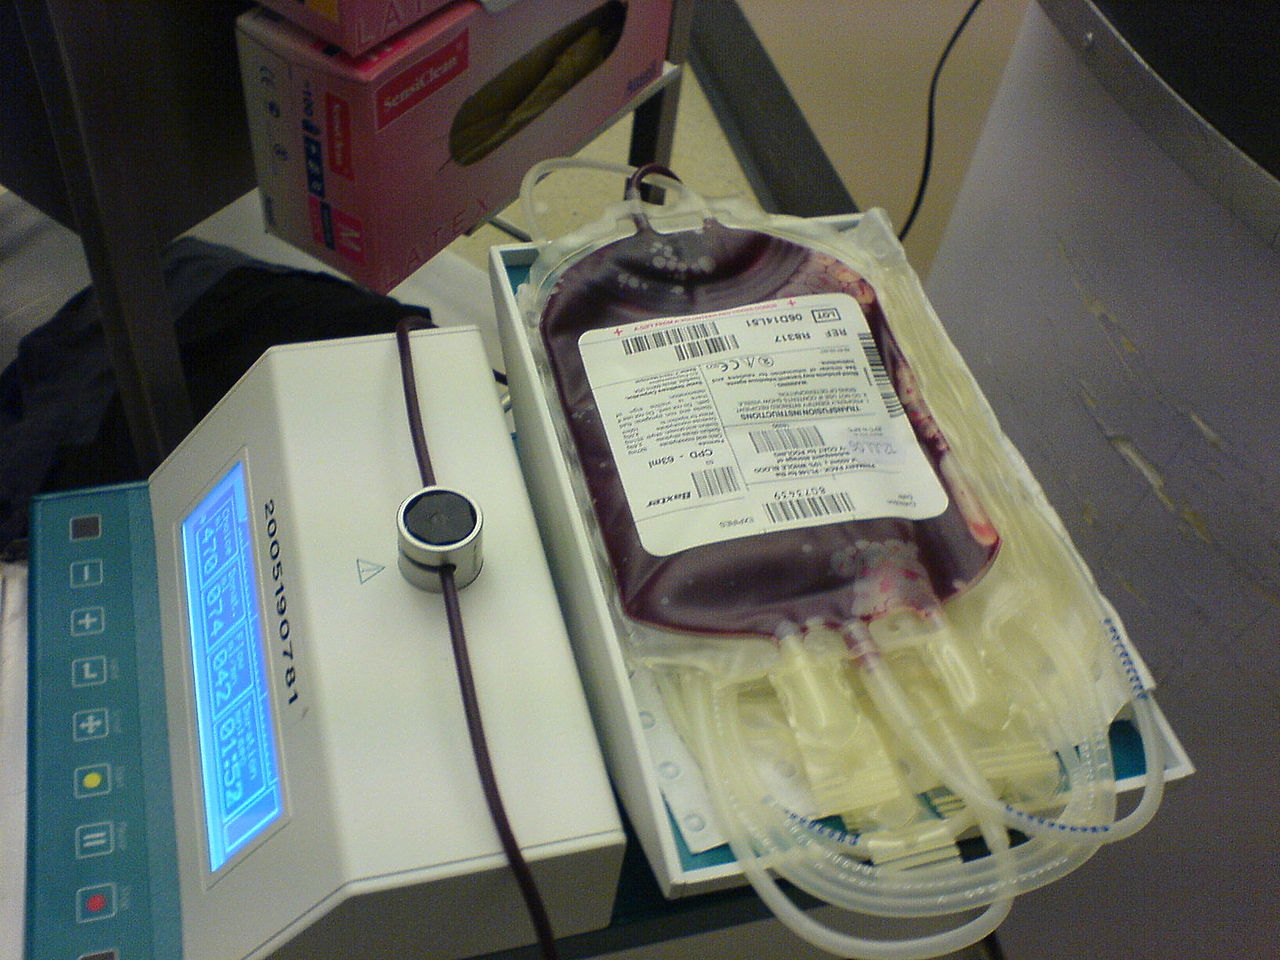 1280px-blood_donation_12-07-06_2